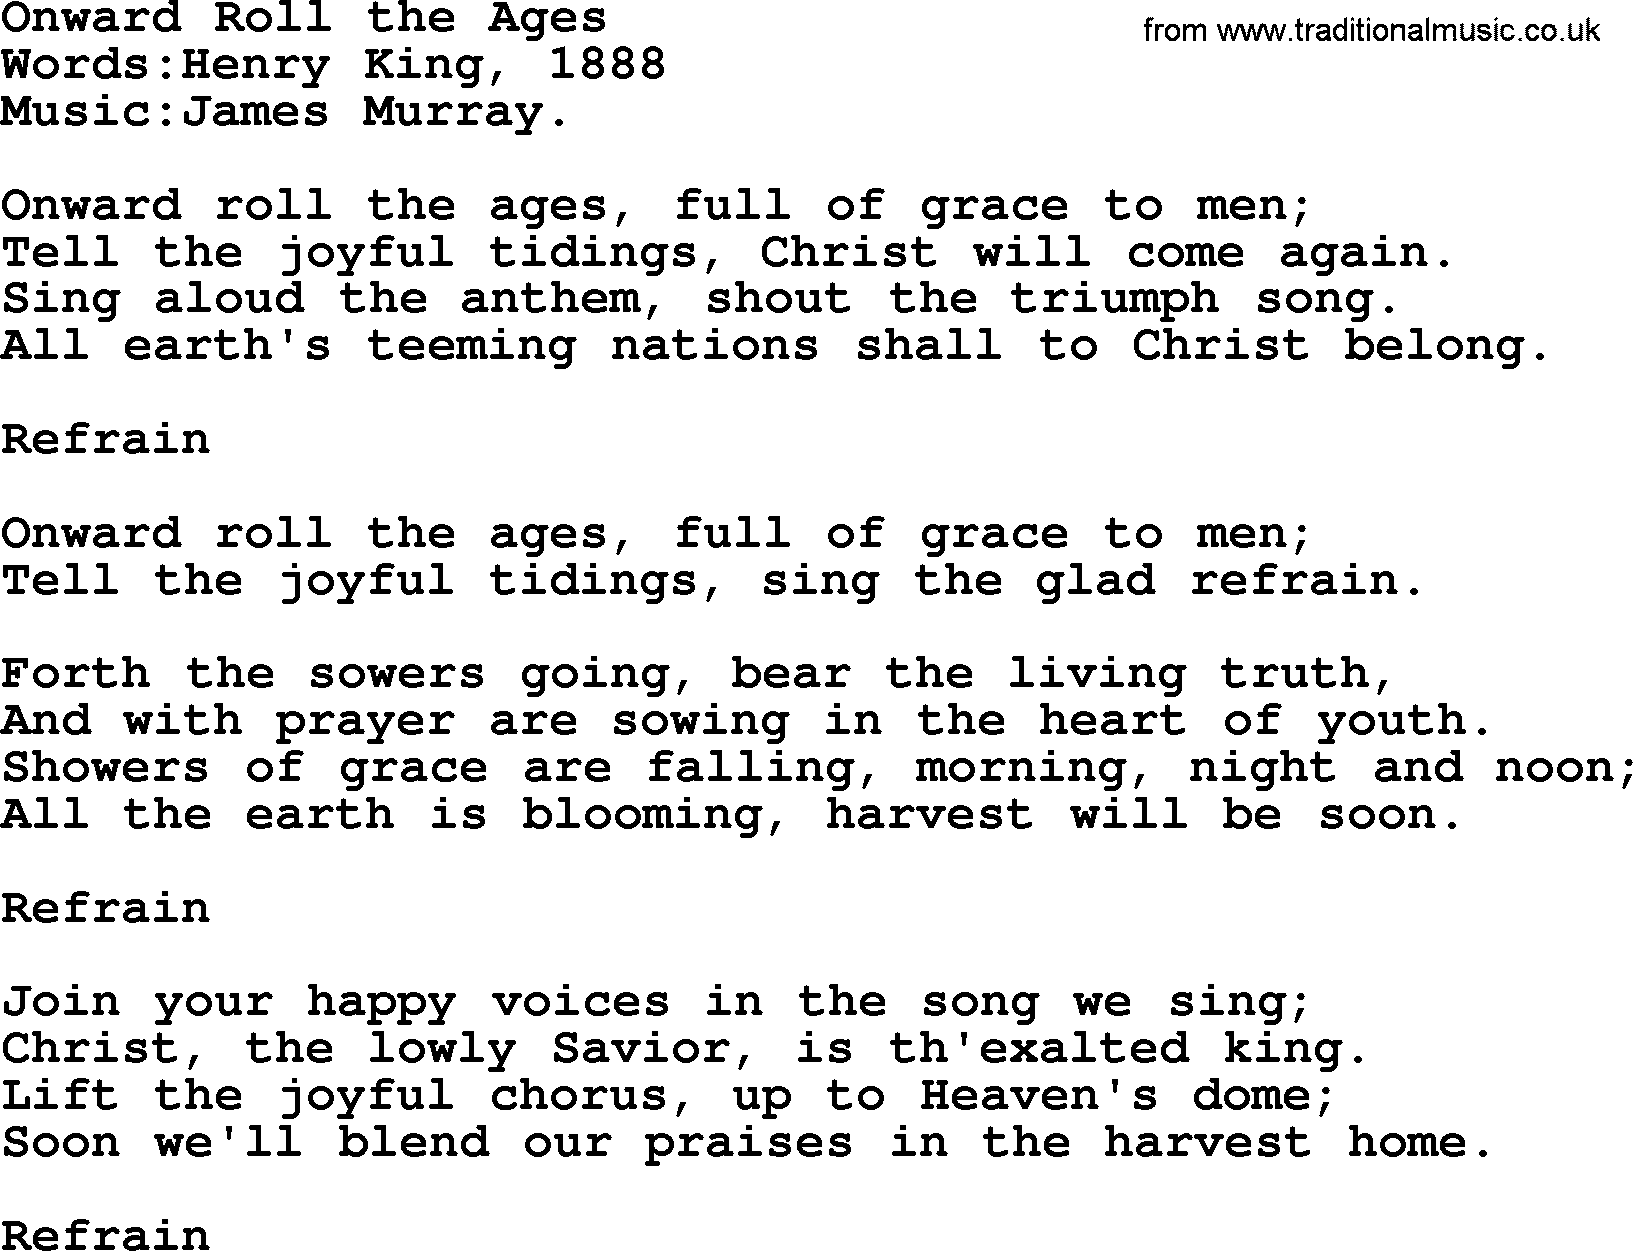 Christian hymns and songs about Jesus' Return(The Second Coming): Onward Roll The Ages, lyrics with PDF